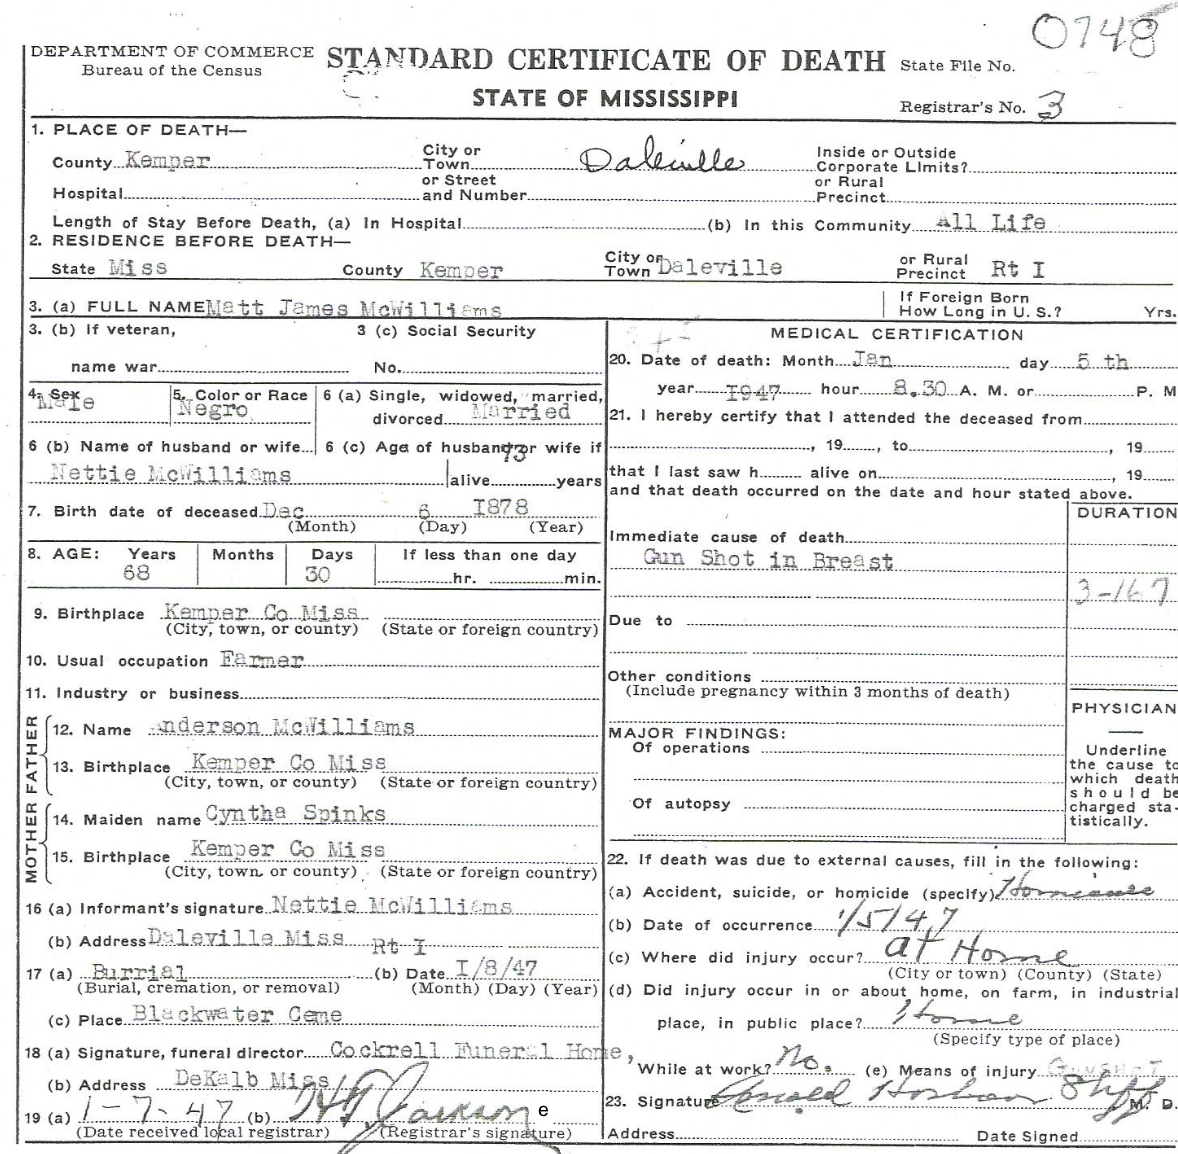 Matt McWilliams death certificate-Signed by his murderer the Sheriff !